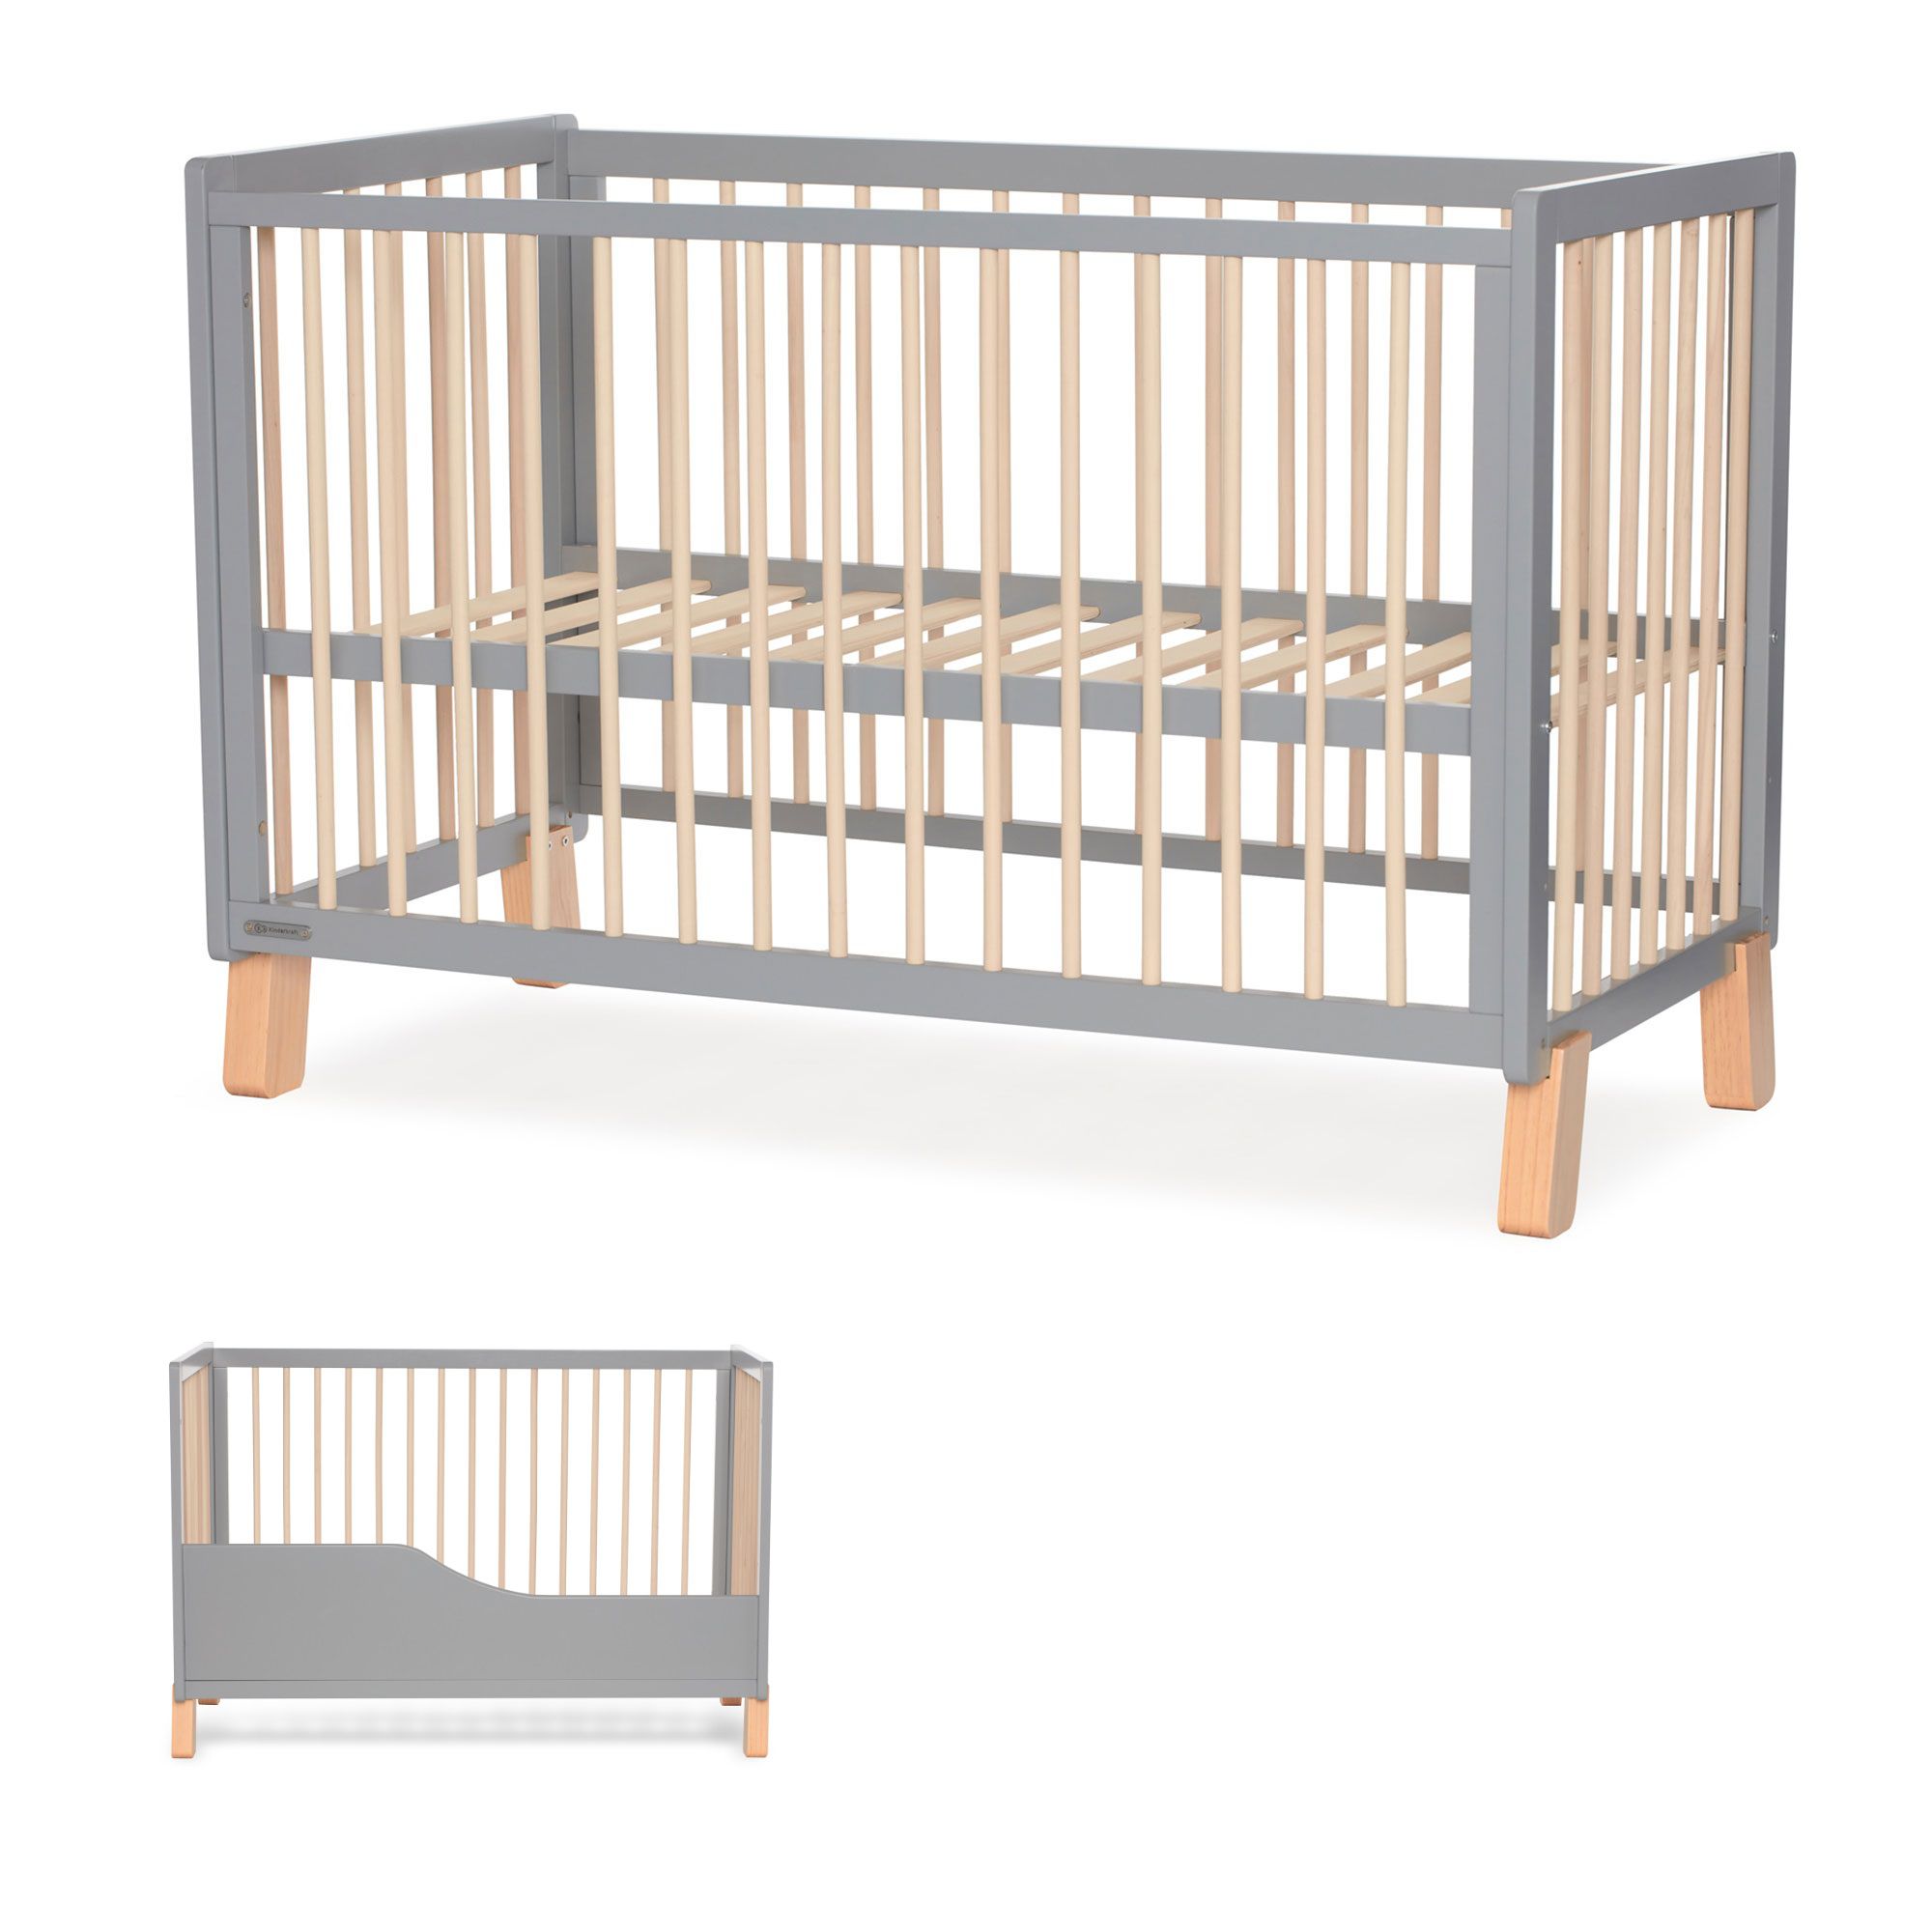 2-in-1 cot